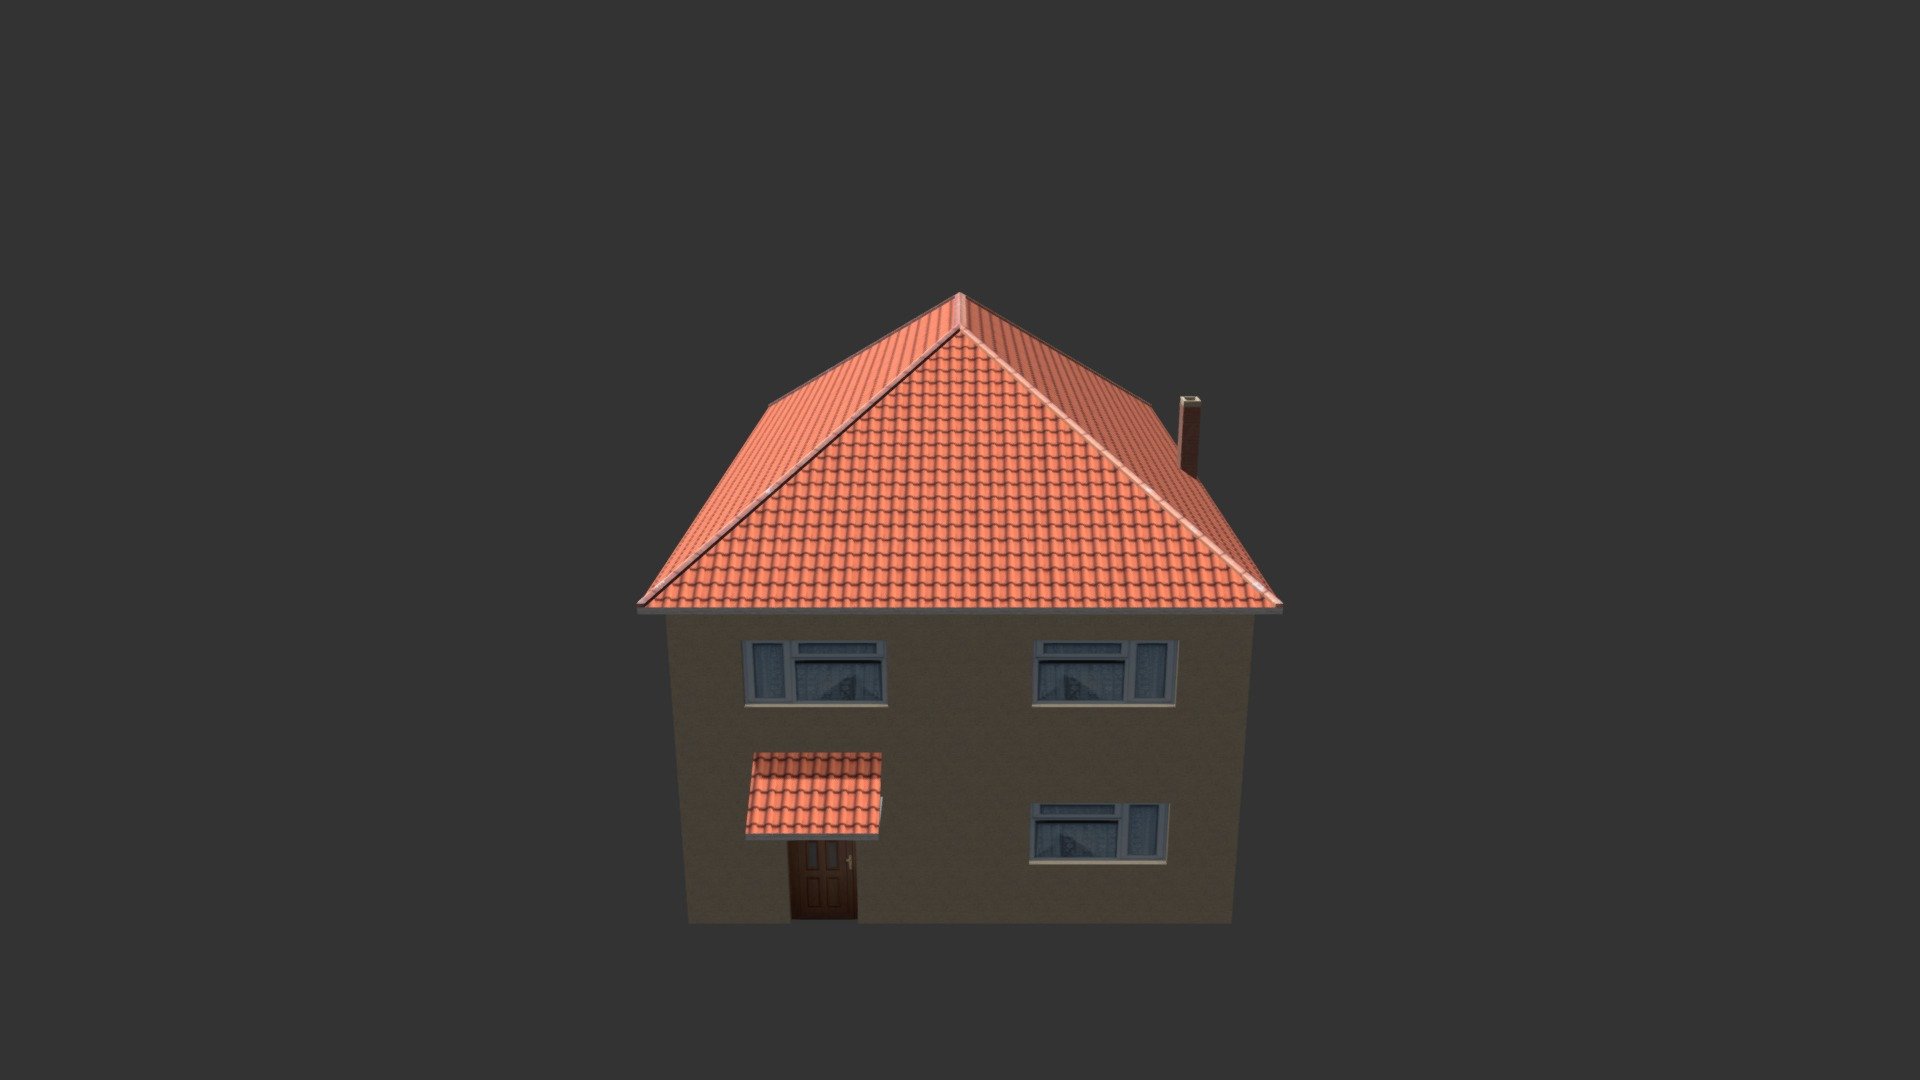 House 12

A low-poly 3d model ready for Virtual Reality (VR), Augmented Reality (AR), games and other real-time apps.

This model is based on a real life building and uses 410 triangles (228 polygons) and 4 materials.

Scaled to a default scale of 1 unit = 1 meter

This set comes with :

Model files in 3DS format files (.3ds) 
Model files in FBX format files (.fbx) 
Model files in OBJ format files (.obj &amp; .mtl) 

Textures : 
Diffuse Maps 
Normal Maps

All Textures are preloaded on the materials and prefabs so this prop is ready to be dropped in to any of your scenes.

Optimised for game engines but can also be used in any 3d package 3d model